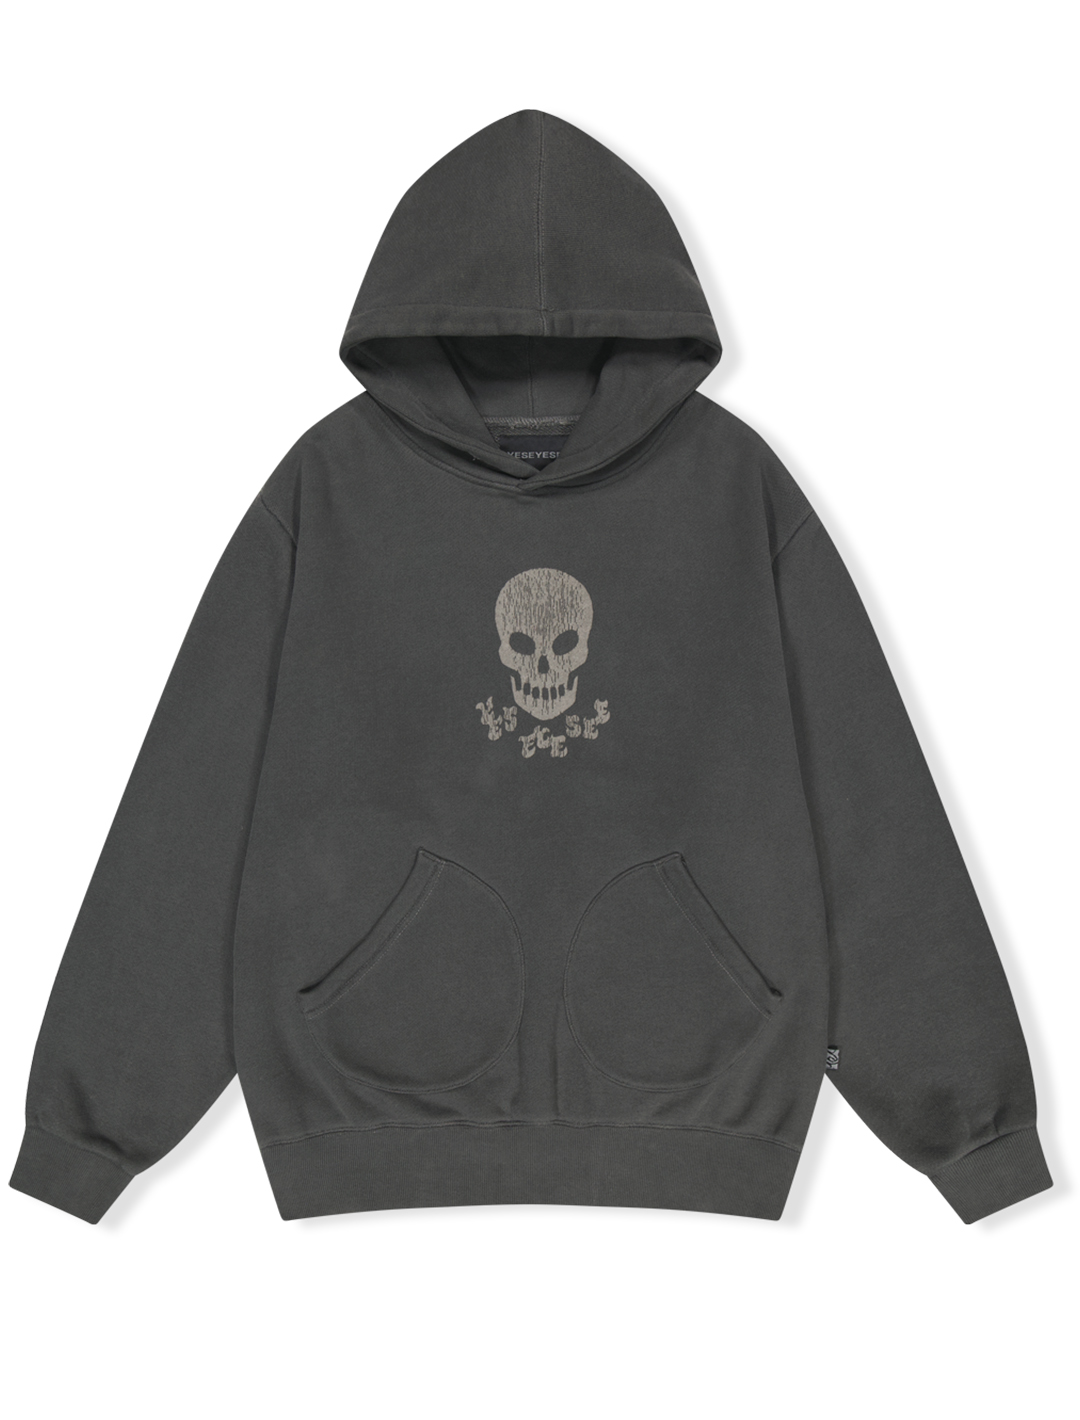 Y.E.S Skull Pigment Hoodie Charcoal